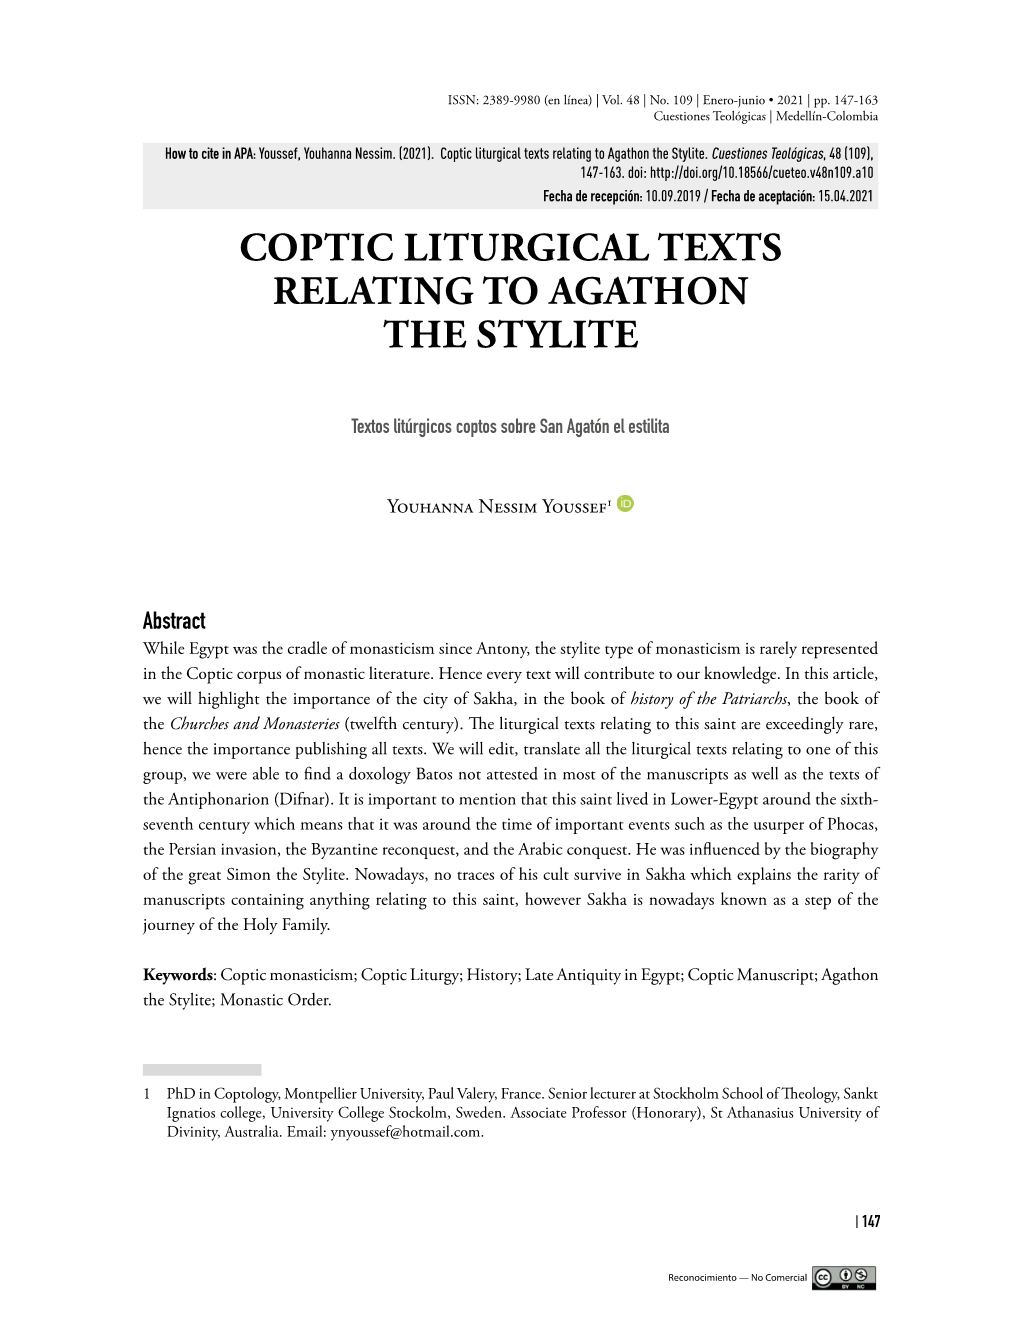 Coptic Liturgical Texts Relating to Agathon the Stylite